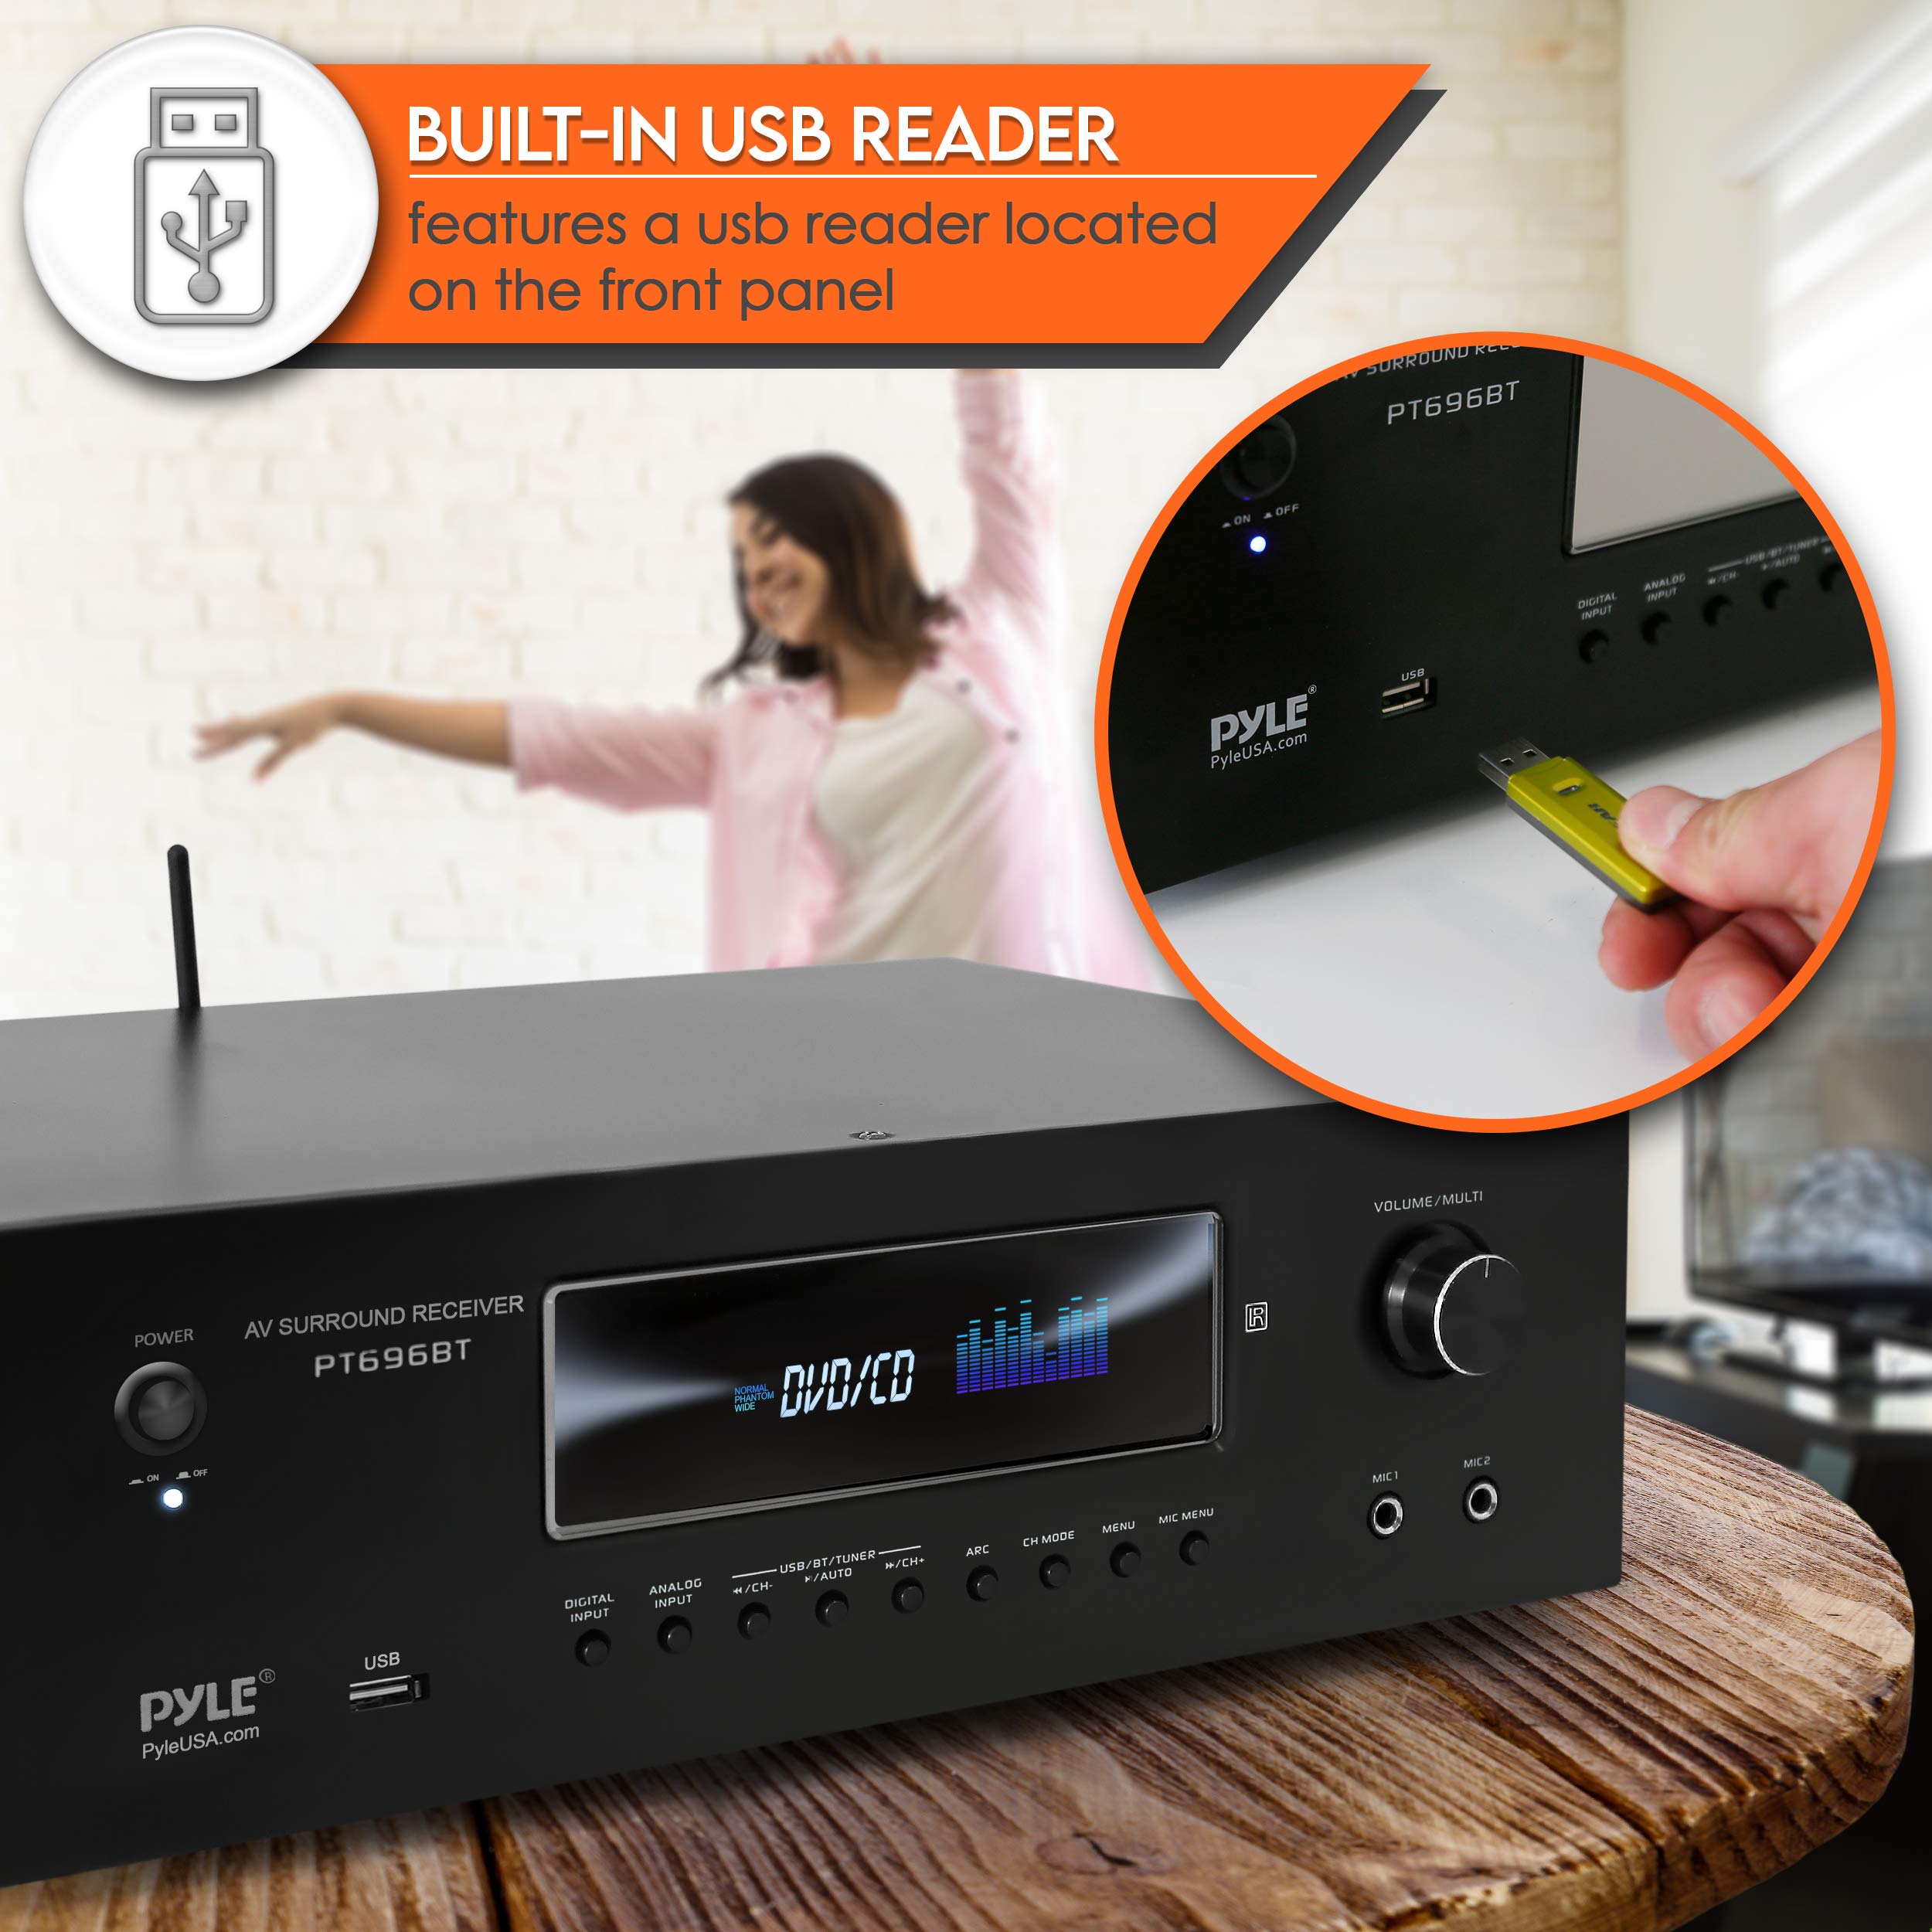 Pyle 1000W Bluetooth Home Theater Receiver - 5.2 Channel Surround Sound Stereo Amplifier System with 4K Ultra HD, 3D Video & Blu-Ray Video Pass-Through Supports, HDMI/MP3/USB/AM/FM Radio - Pyle, Black